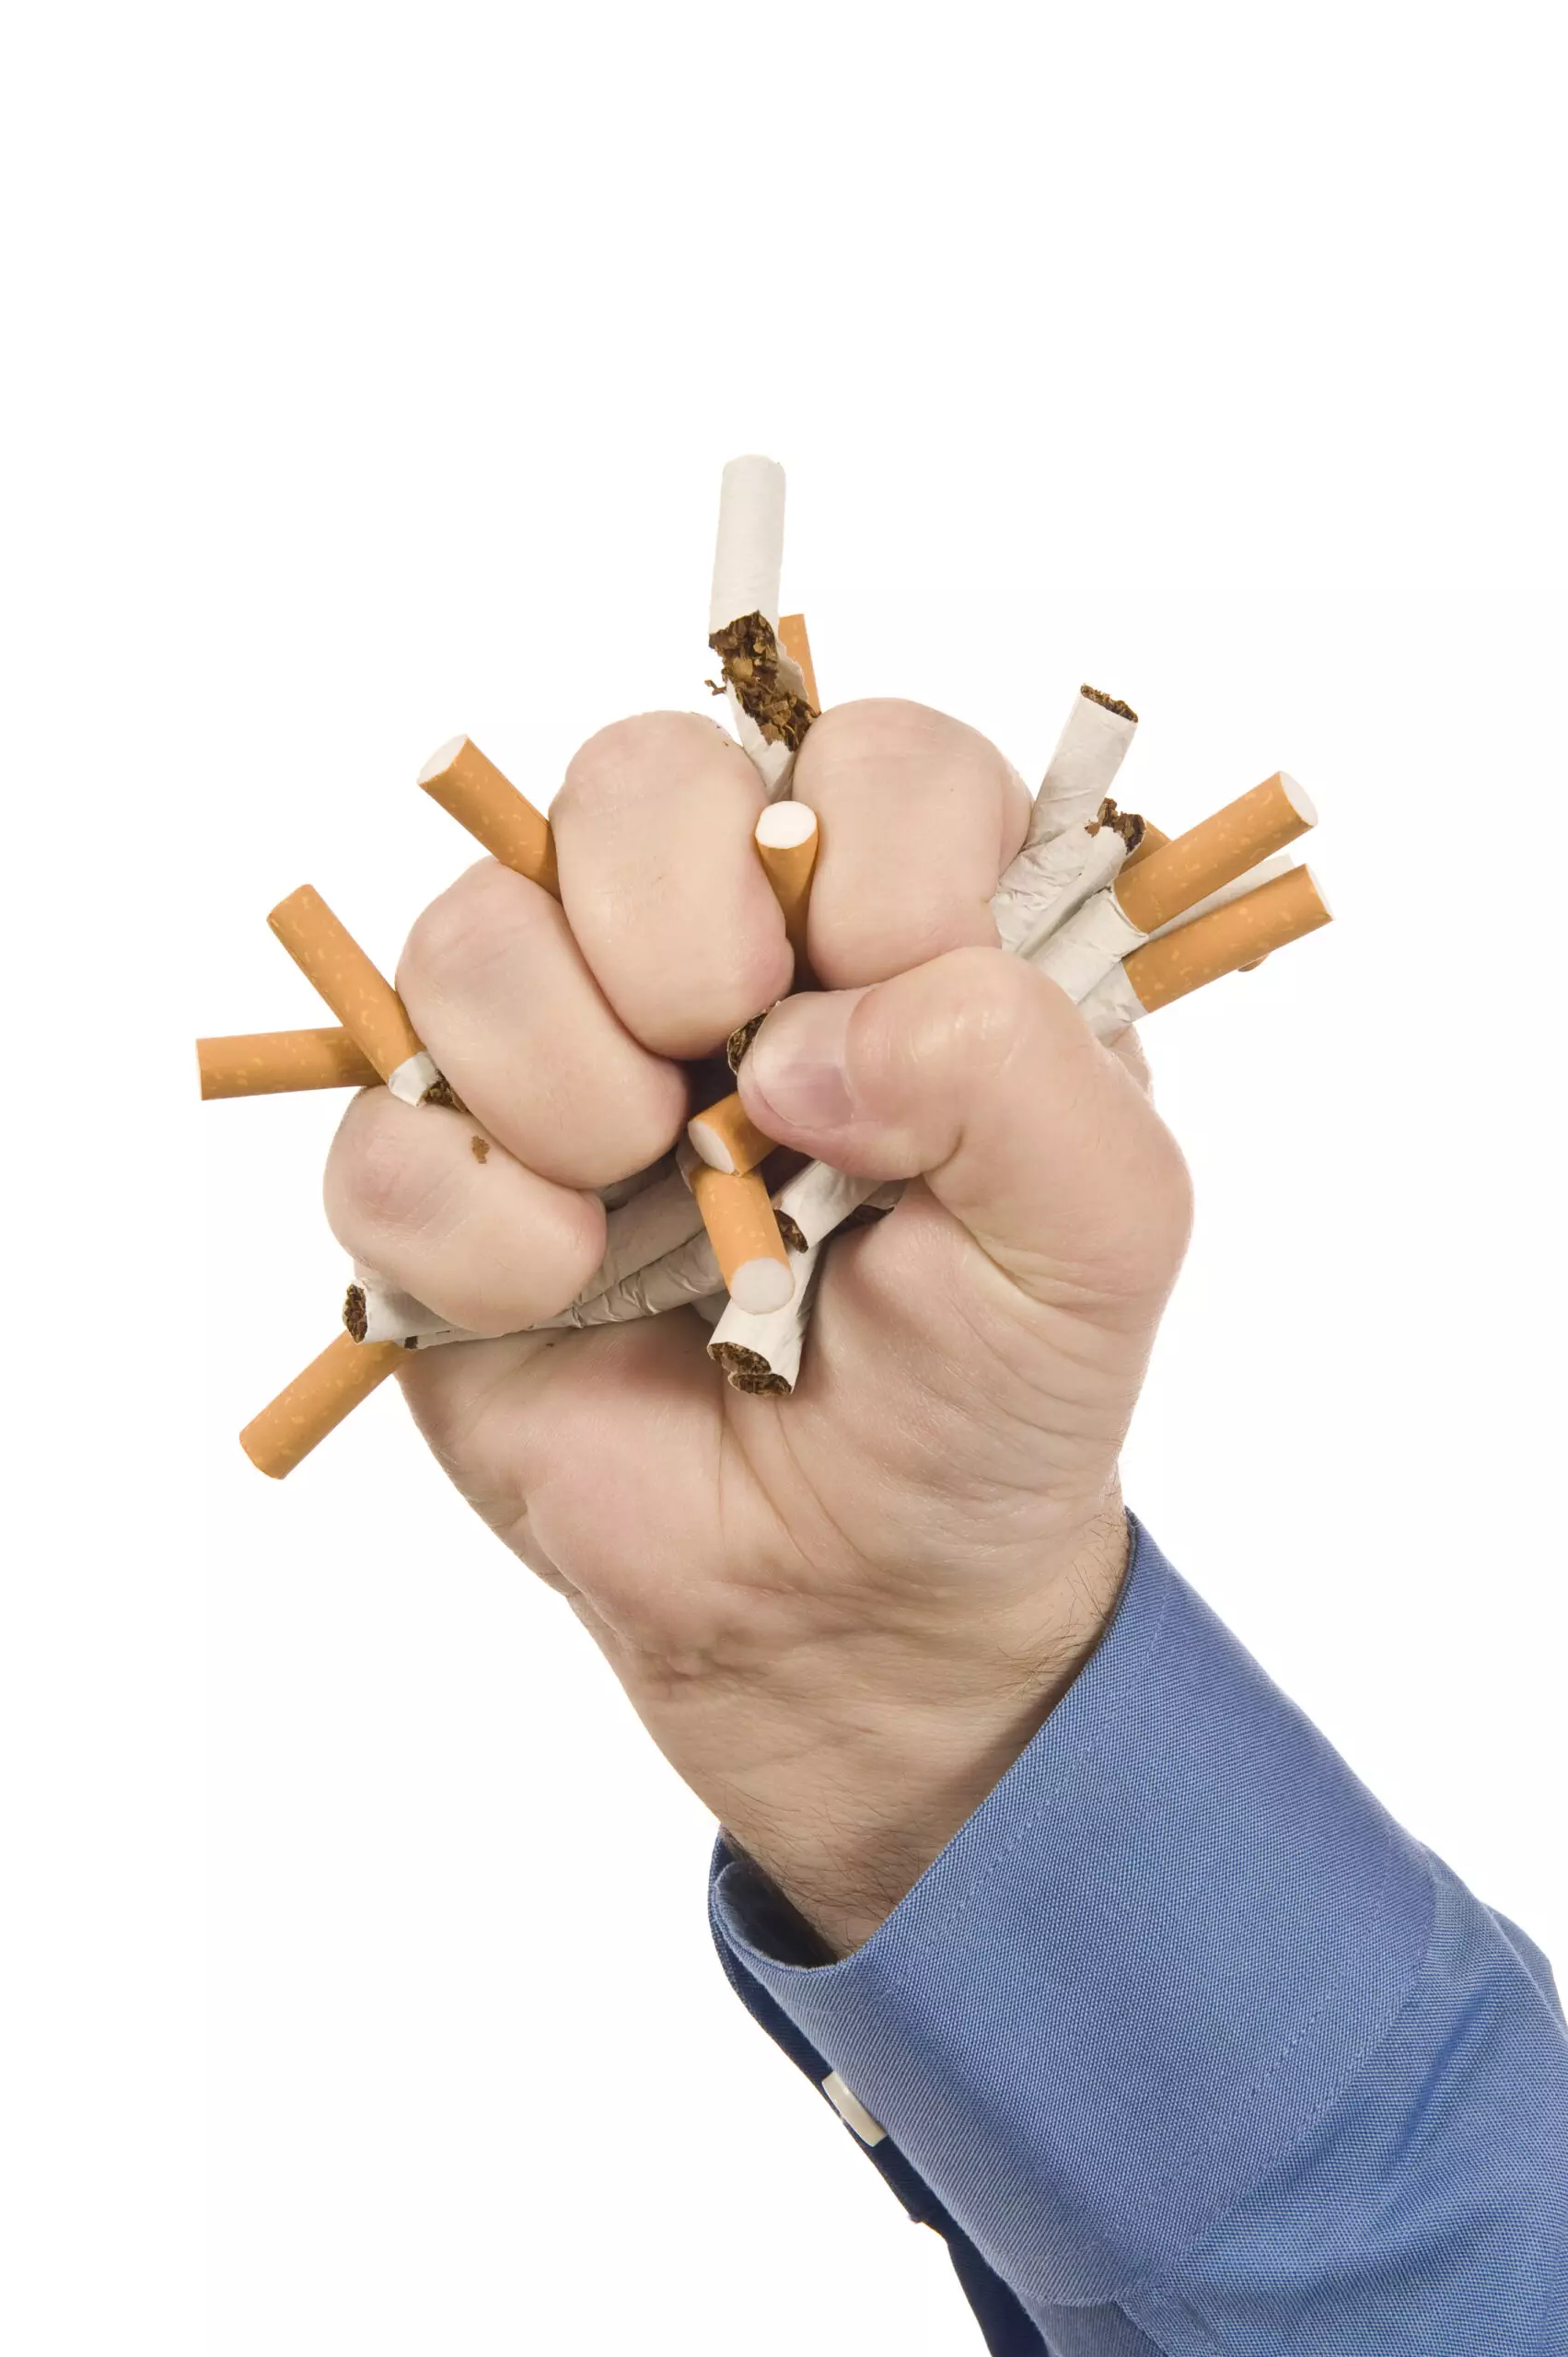 Hand crushing multiple cigarettes, quitting smoking concept.